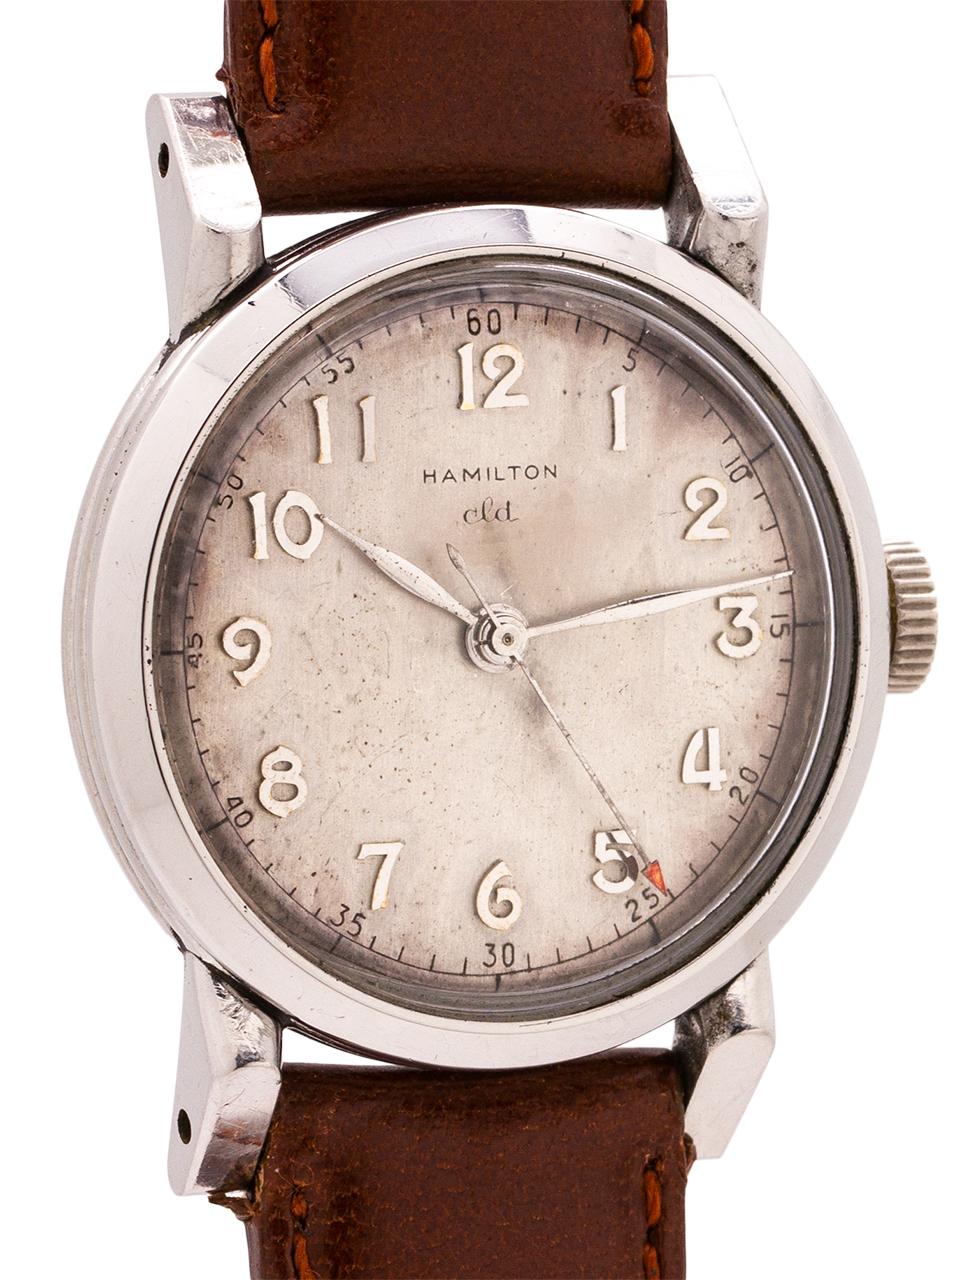 Hamilton vintage man’s manual wind watch, circa 1950. This classic design stainless steel case measures 30mm, with bold angled lugs and snap back. The dial is easily the most interesting part of this Hamilton, with its satin silver having aged to a